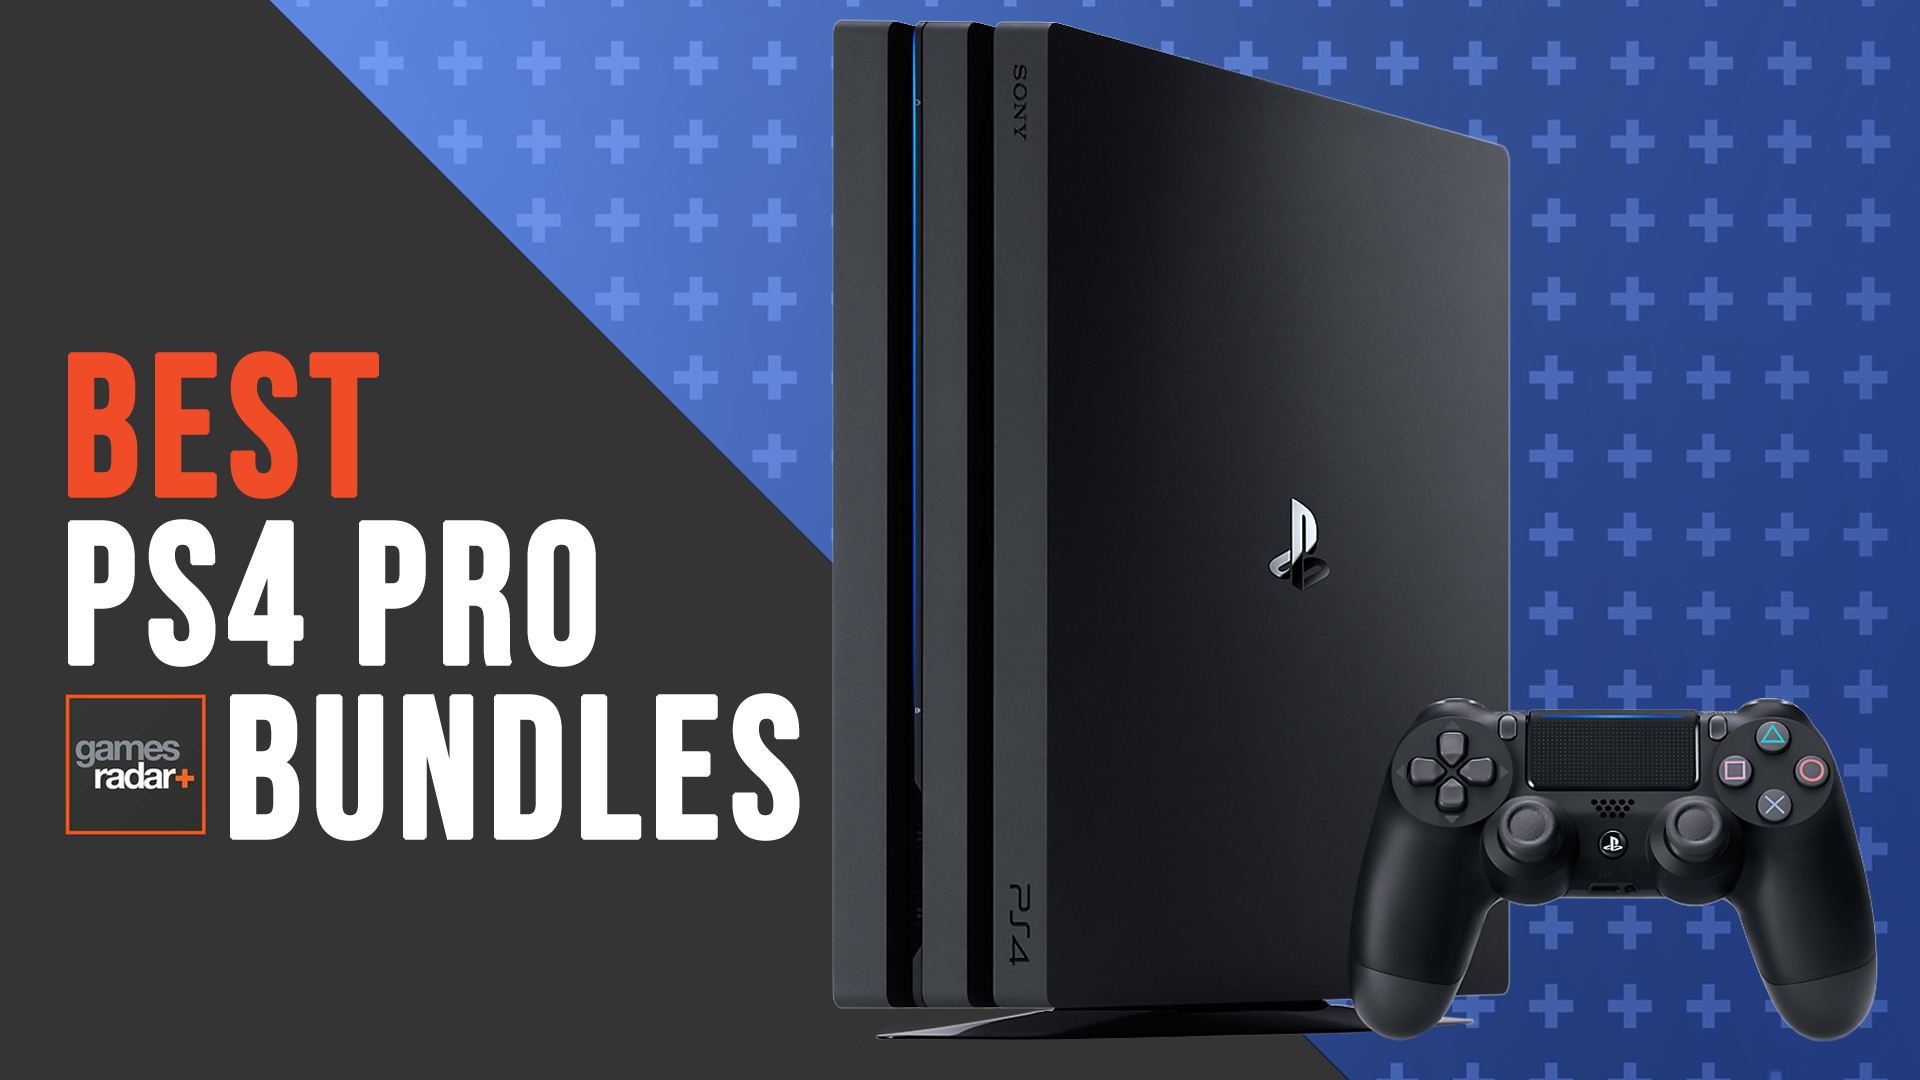 The Best Ps4 Pro Bundles Deals And Prices 2020 Where To Find Stock Today Gamesradar